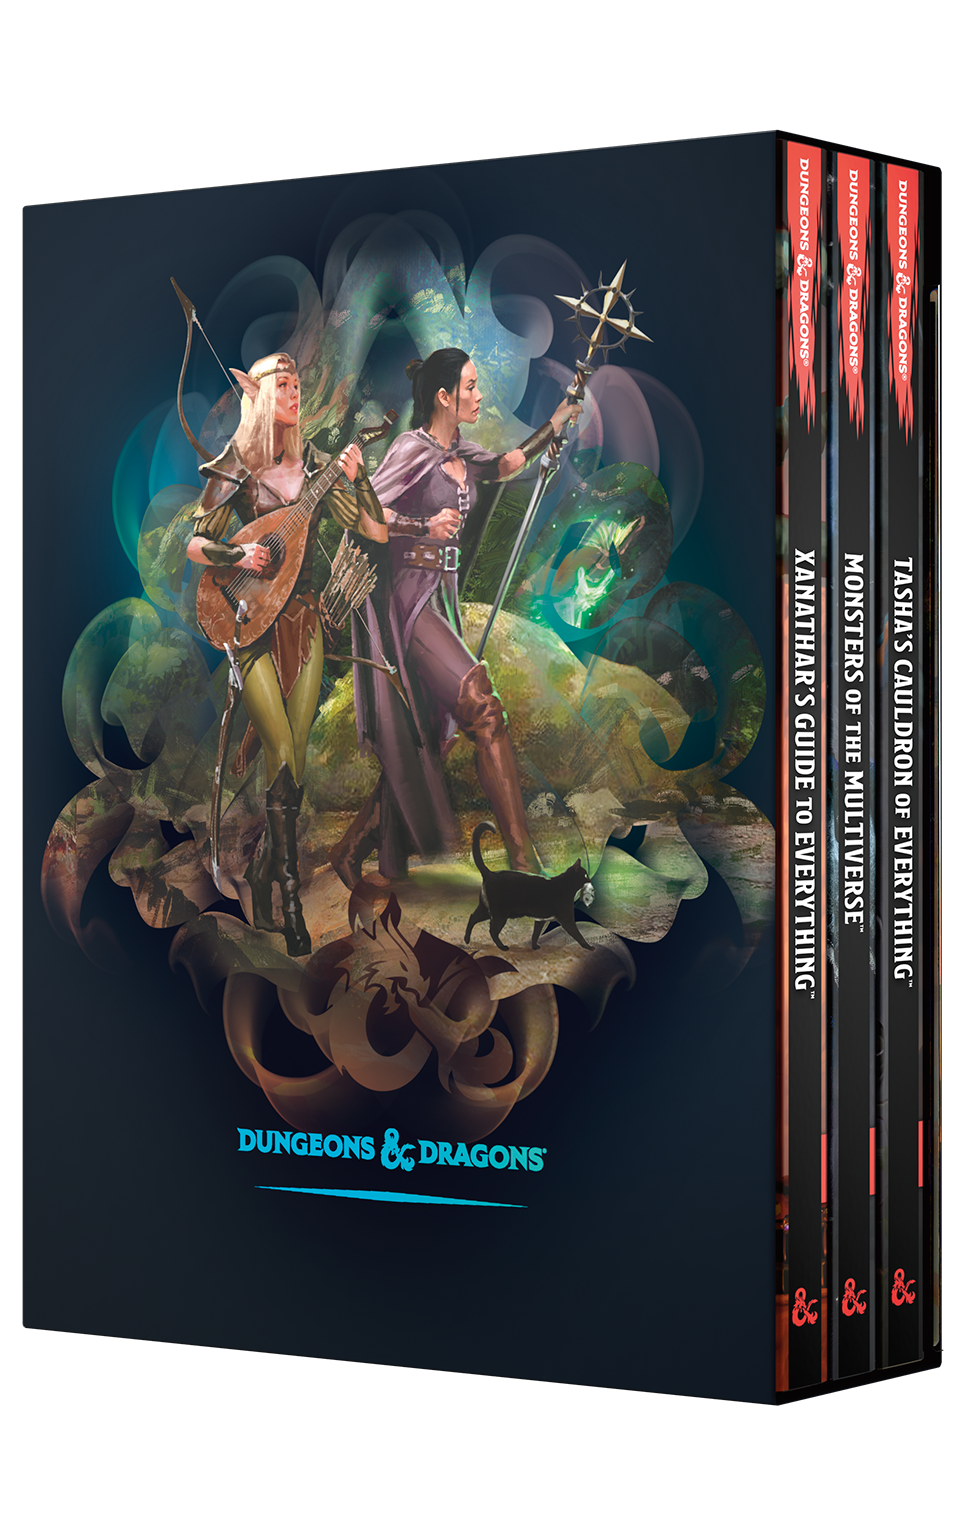 Dungeons & Dragons 5th edition - D&D Rules Expansion Gift Set